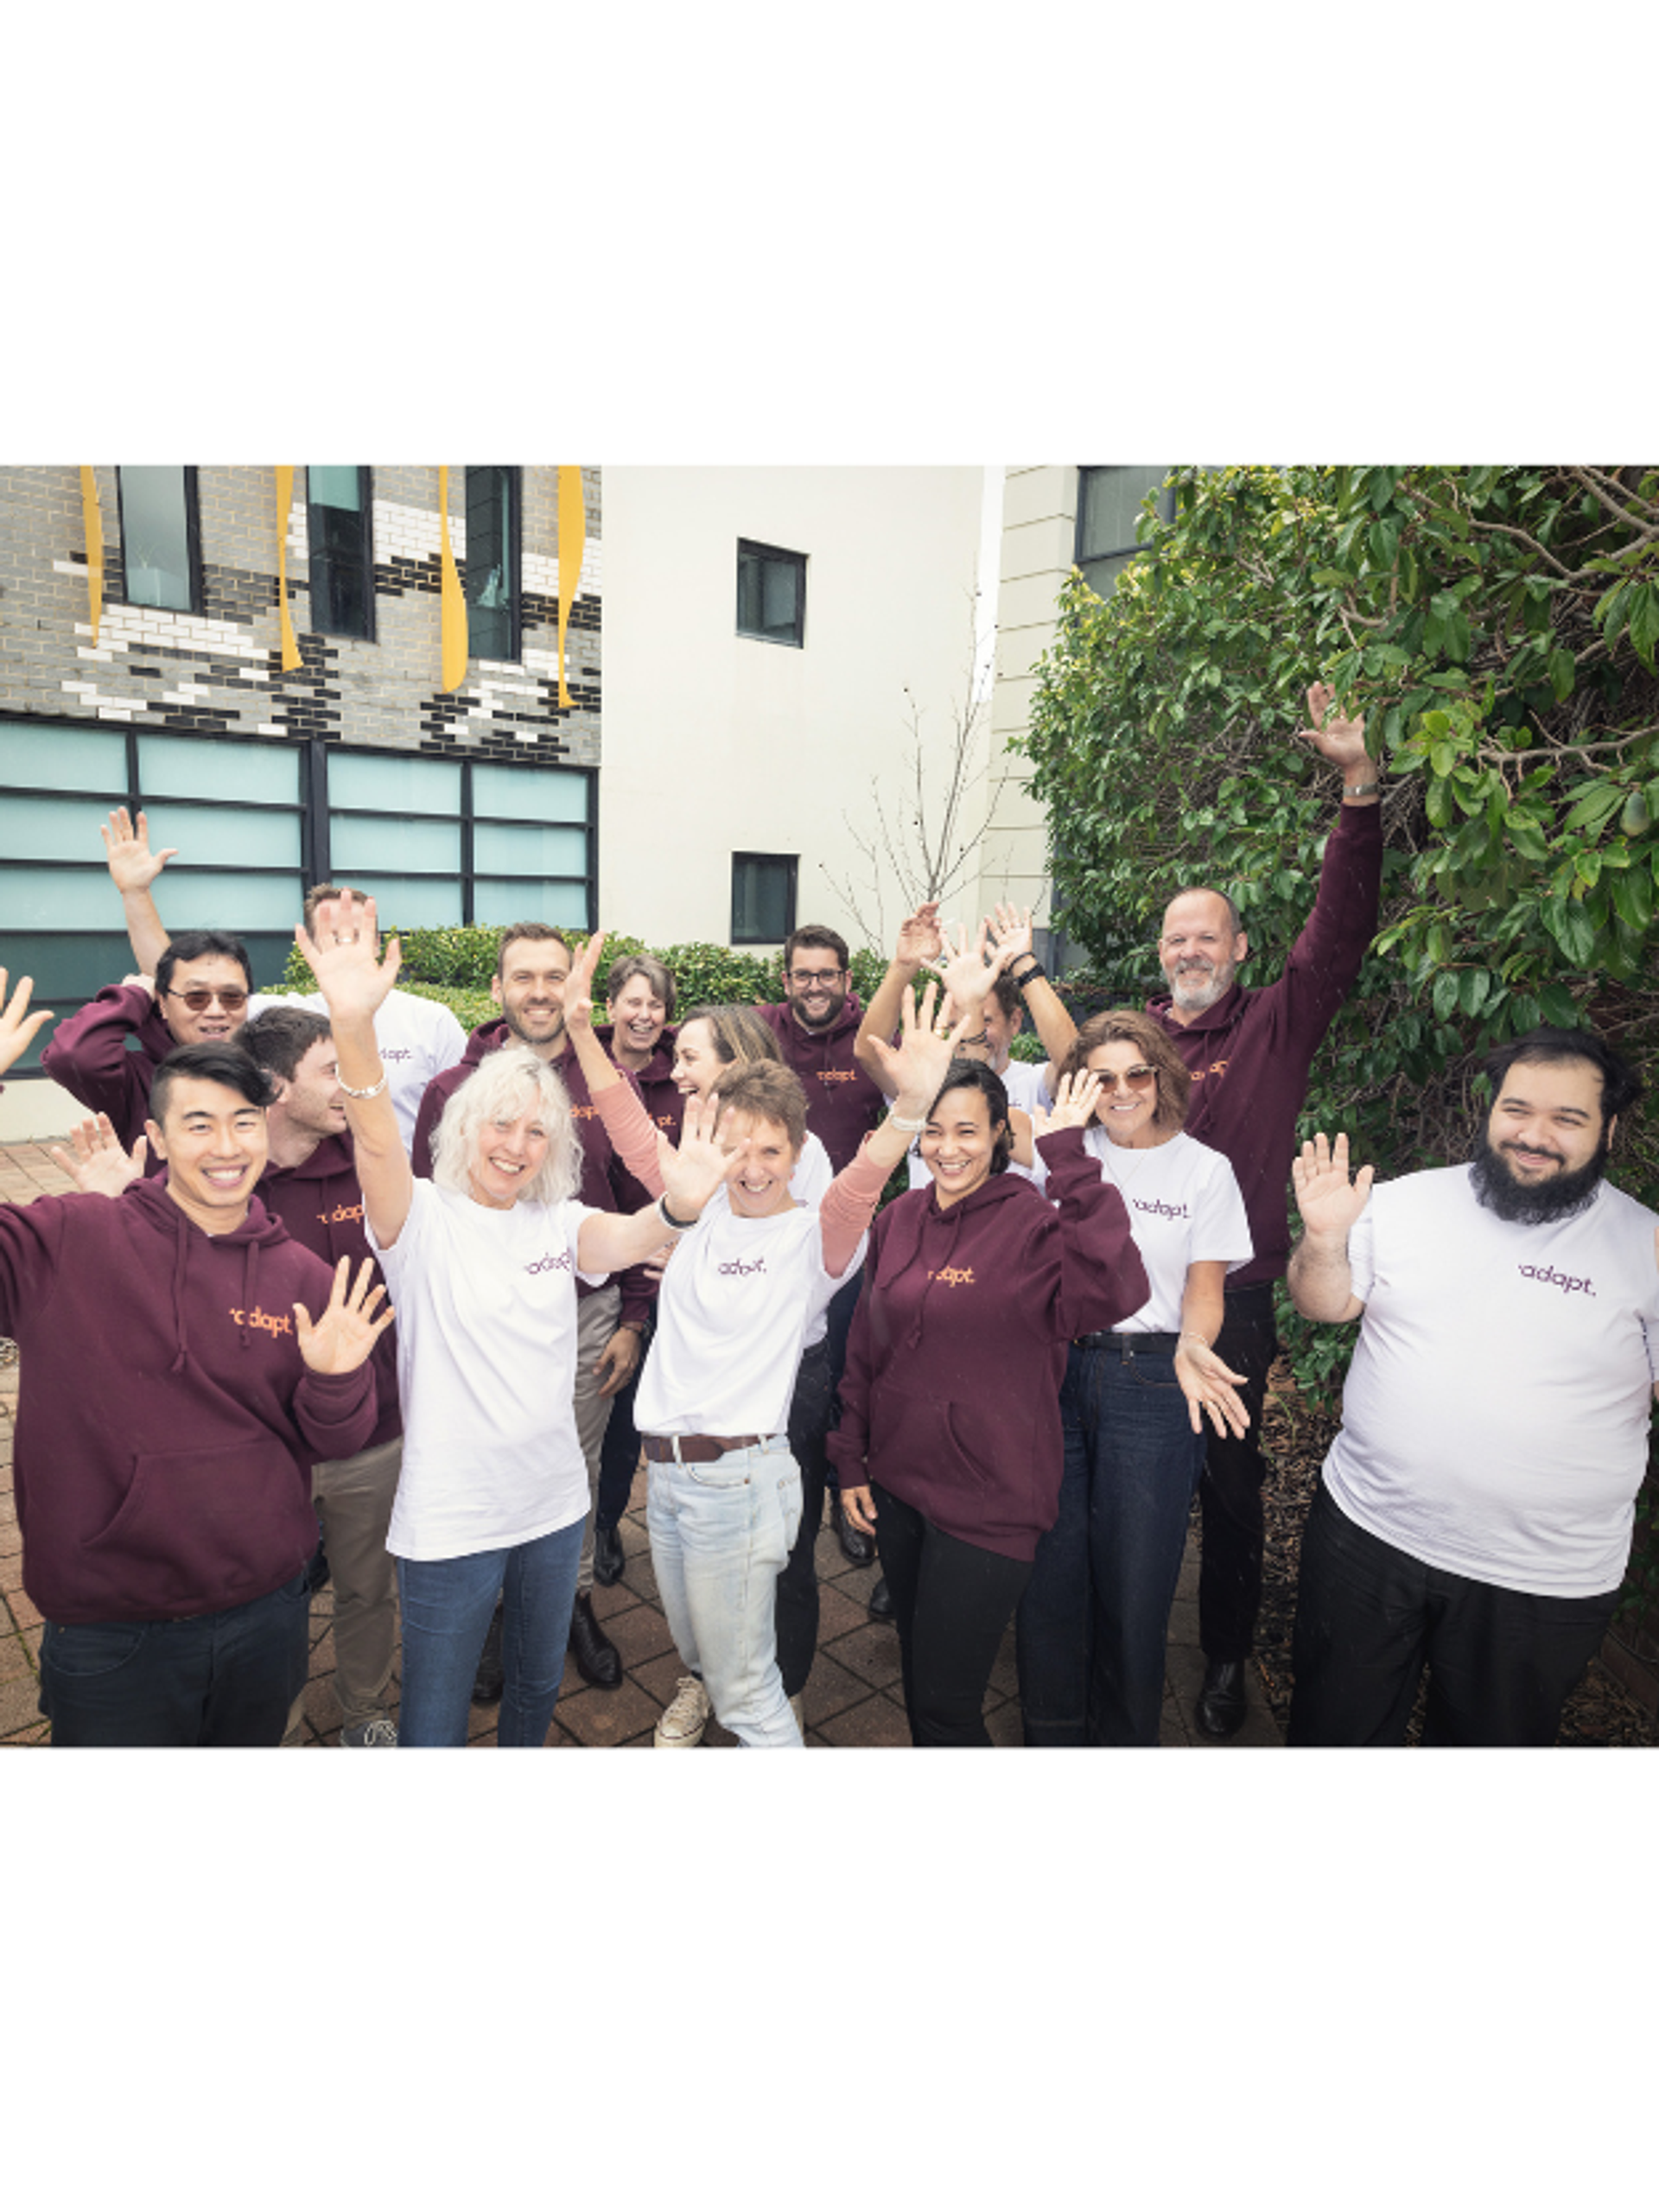 Adapt team members celebrating outdoors, wearing Adapt hoodies and T-shirts, with hands raised in excitement.